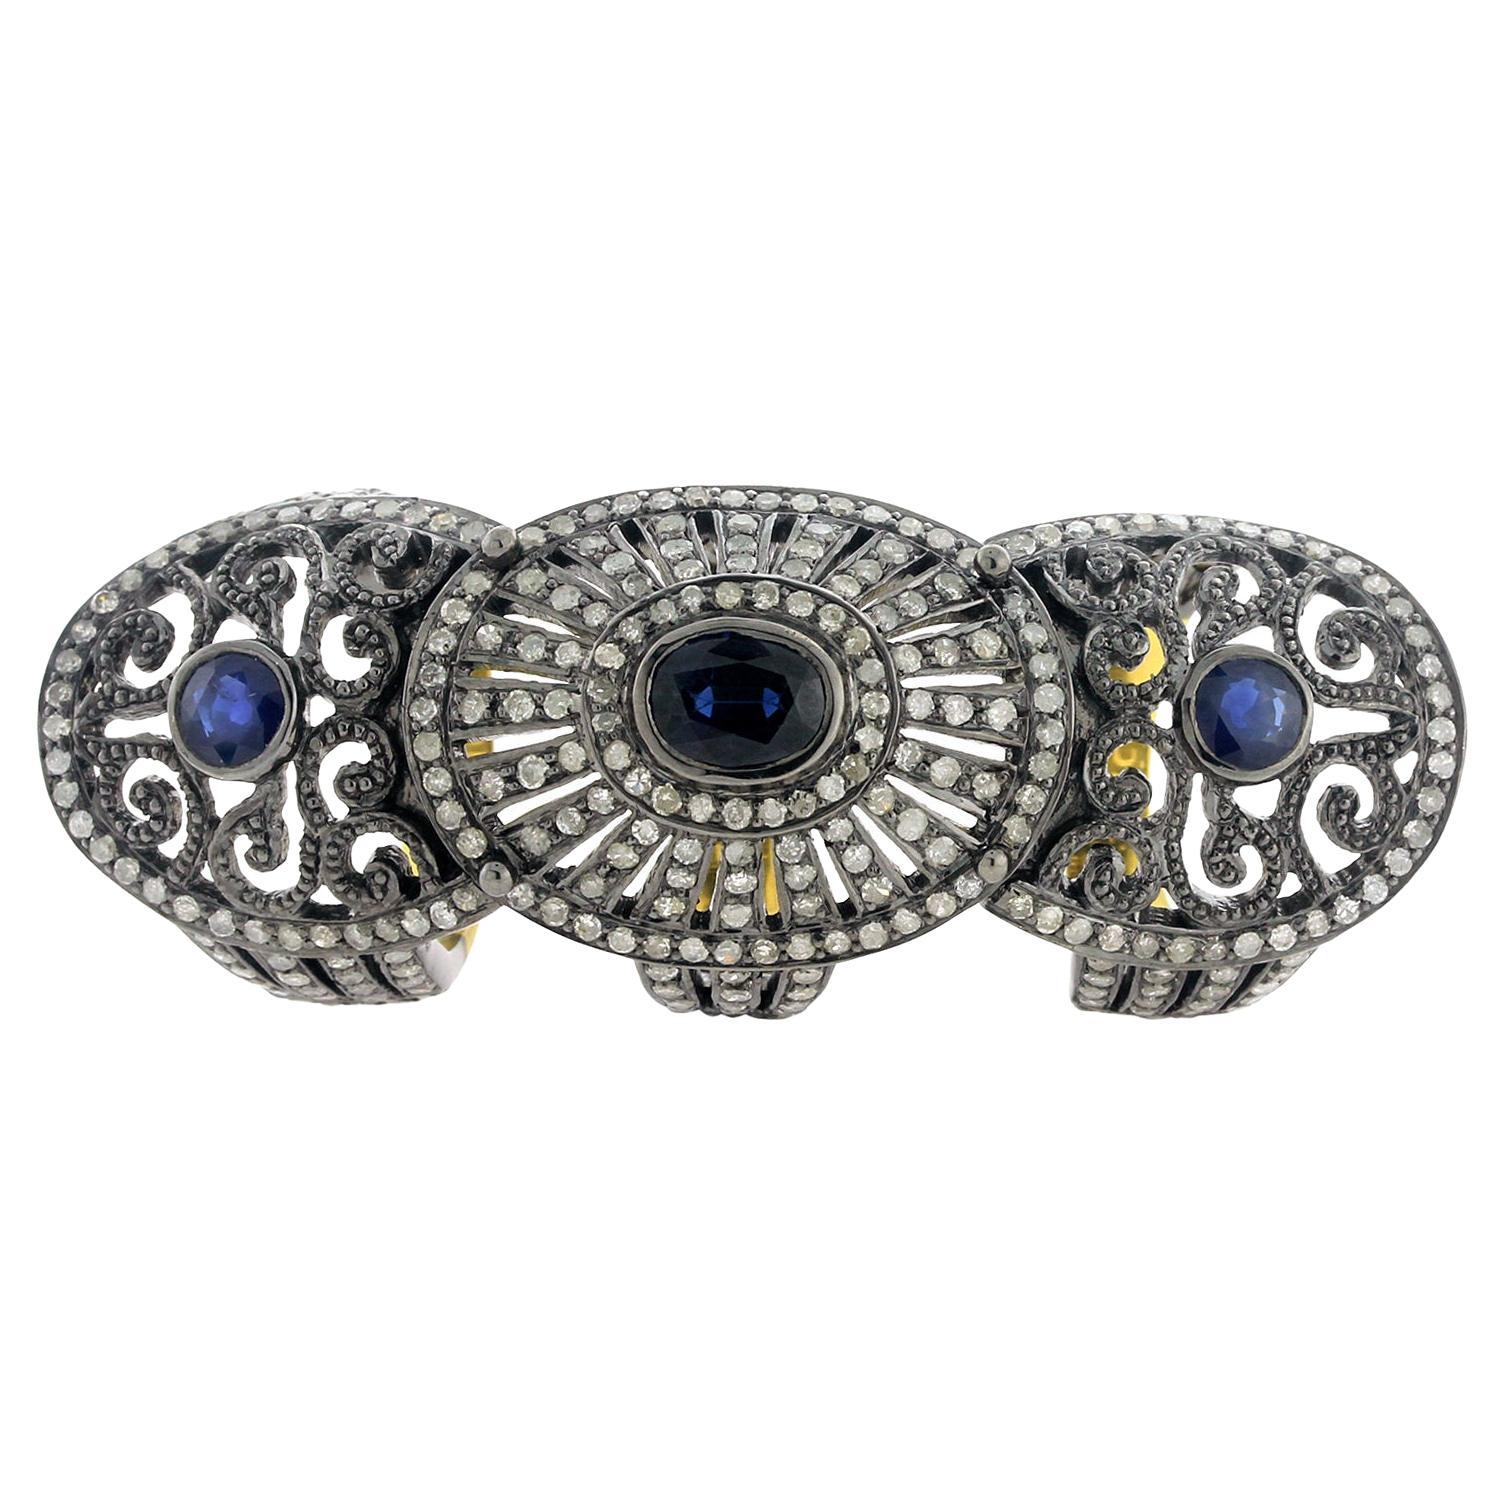 3 Stone Blue Sapphire Knuckle Ring with Pave Diamonds Made in 18k Gold & Silver For Sale